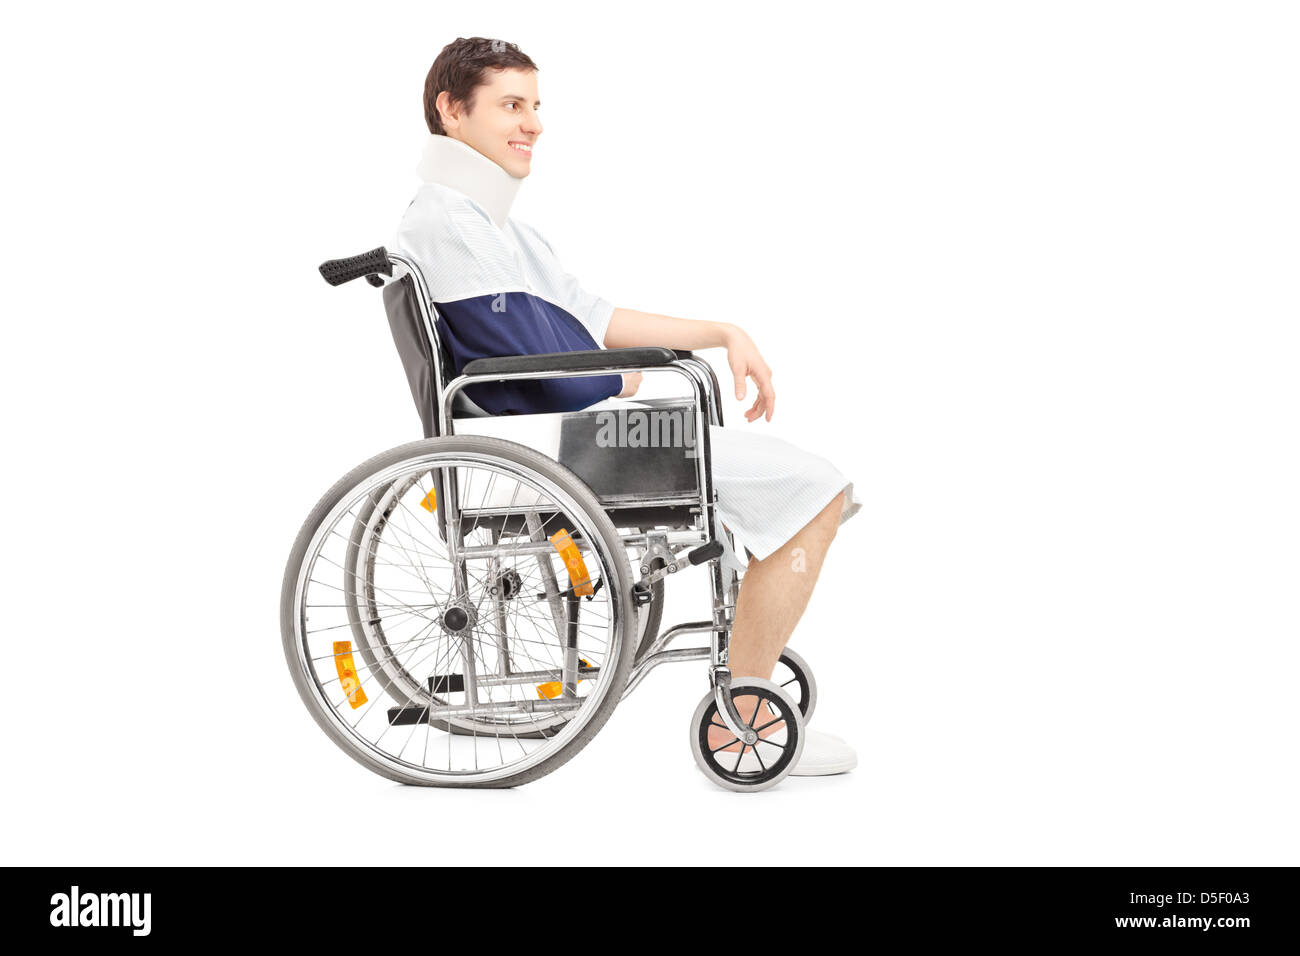 Disabled patient with broken arm in a wheelchair isolated on white background Stock Photo